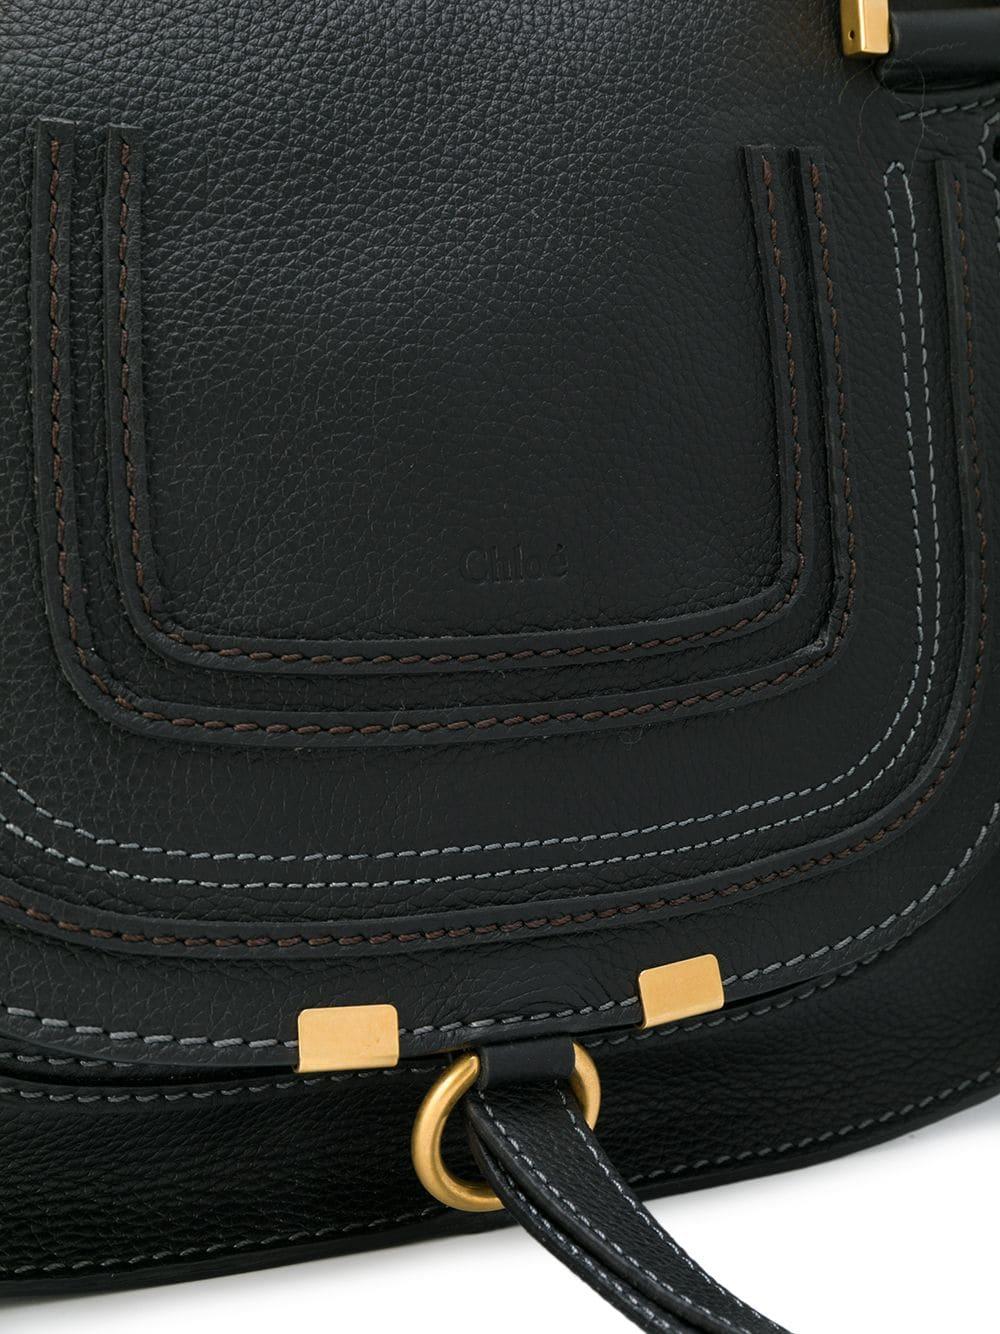 Chloé Leather Marcie Small Double Carry Bag in 1 (Black) - Save 14% - Lyst